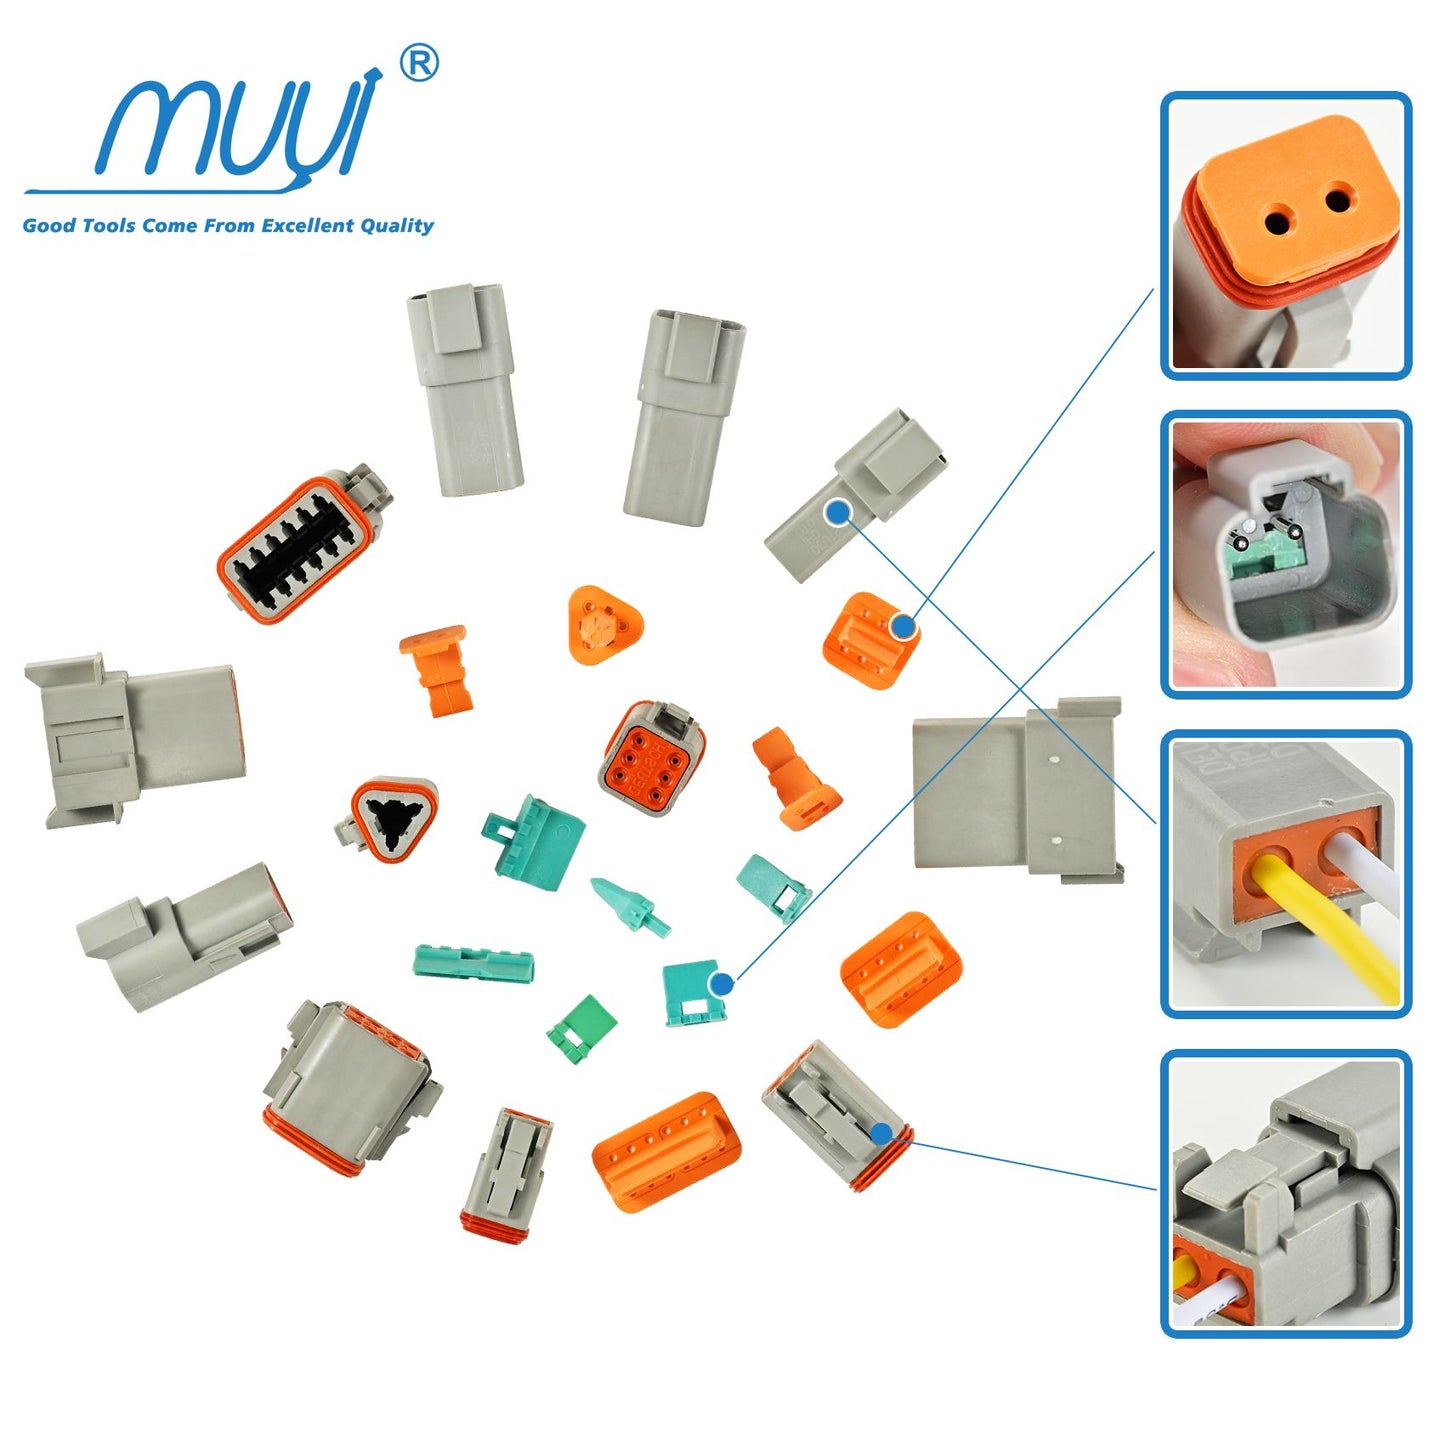 MUYI 371PCS DT Connector Kits, 2/3/4/6/8/12 Pin Connectors for 20 18 16 14AWG Cable Harness, Included Size 16 Solid Barrel Contacts, Wire Crimper, Wire Strippers and Pin Socket Removal Tool